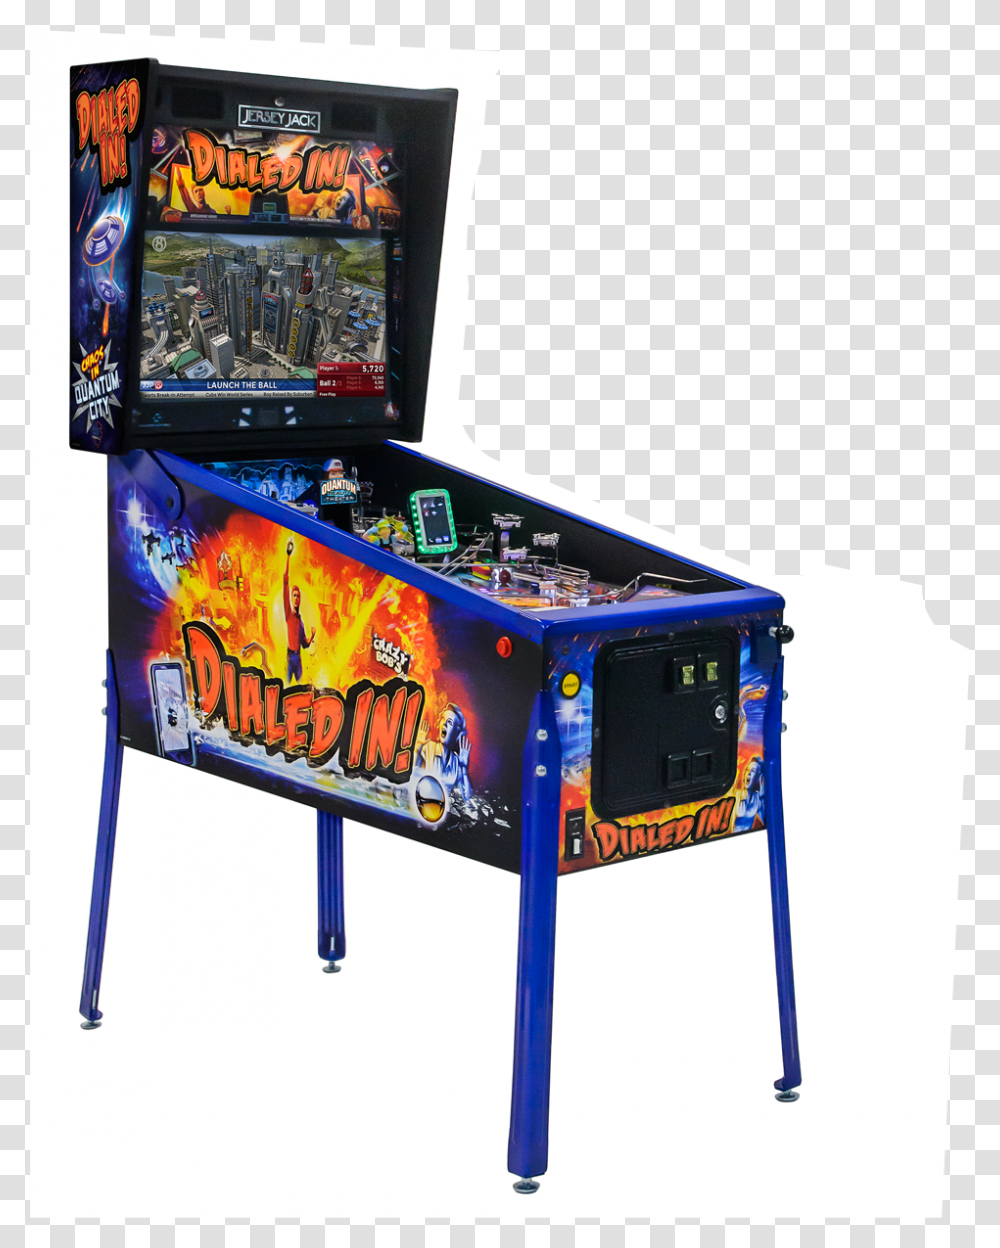 Dialed In Pinball Limited Edition, Arcade Game Machine Transparent Png